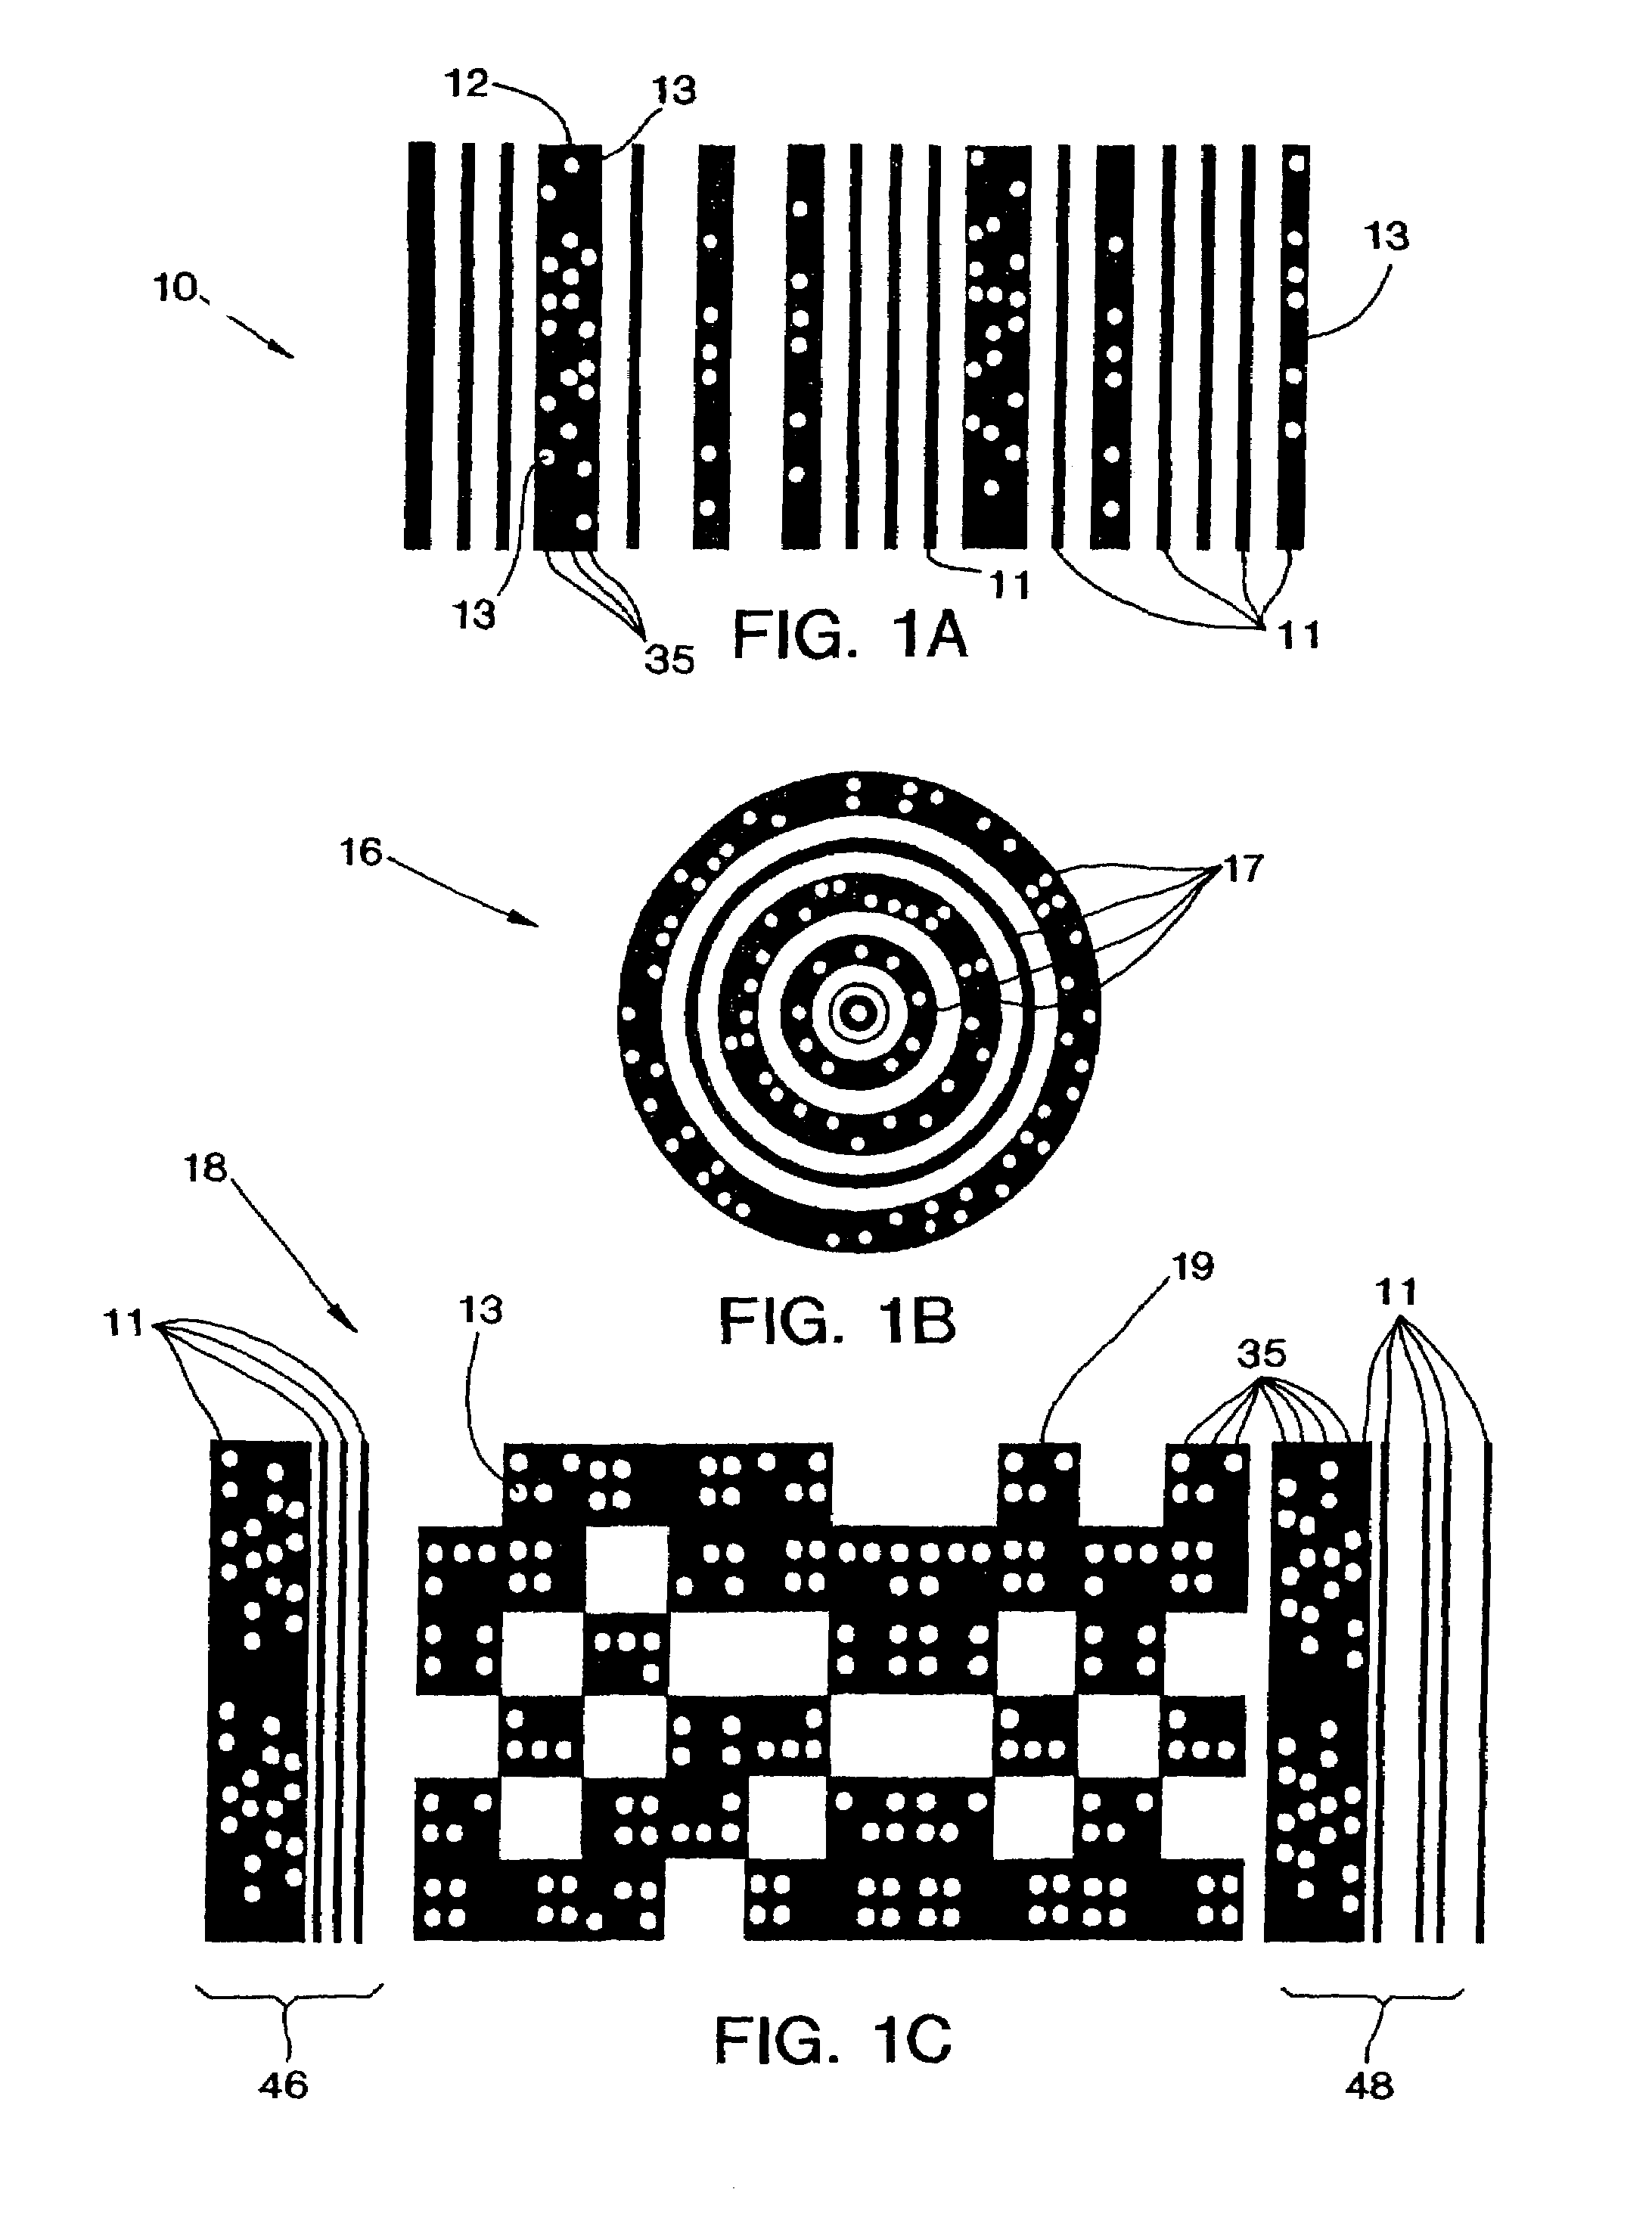 Method and apparatus for encoding and decoding bar codes with primary and secondary information and method of using such bar codes